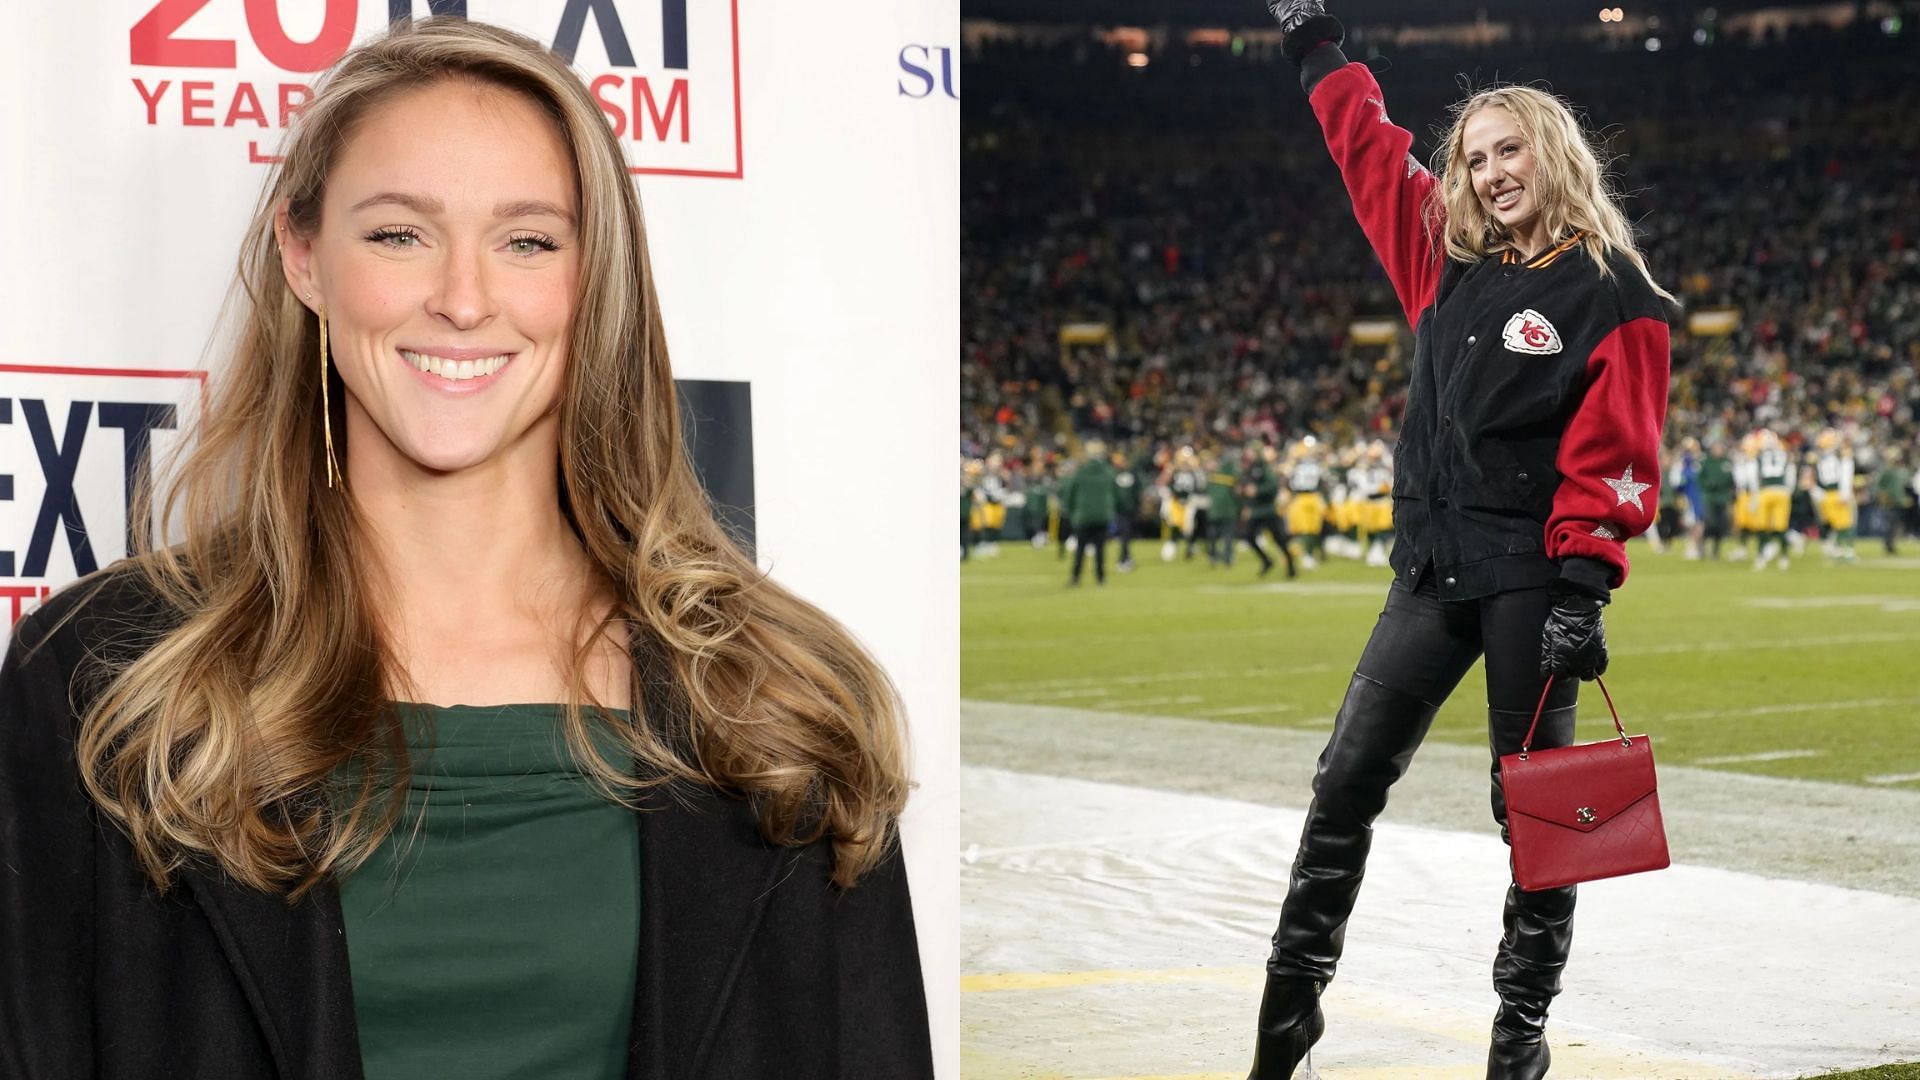 Do Brittany Mahomes and Kylie Kelce occupy differing ends of the WAG spectrum?